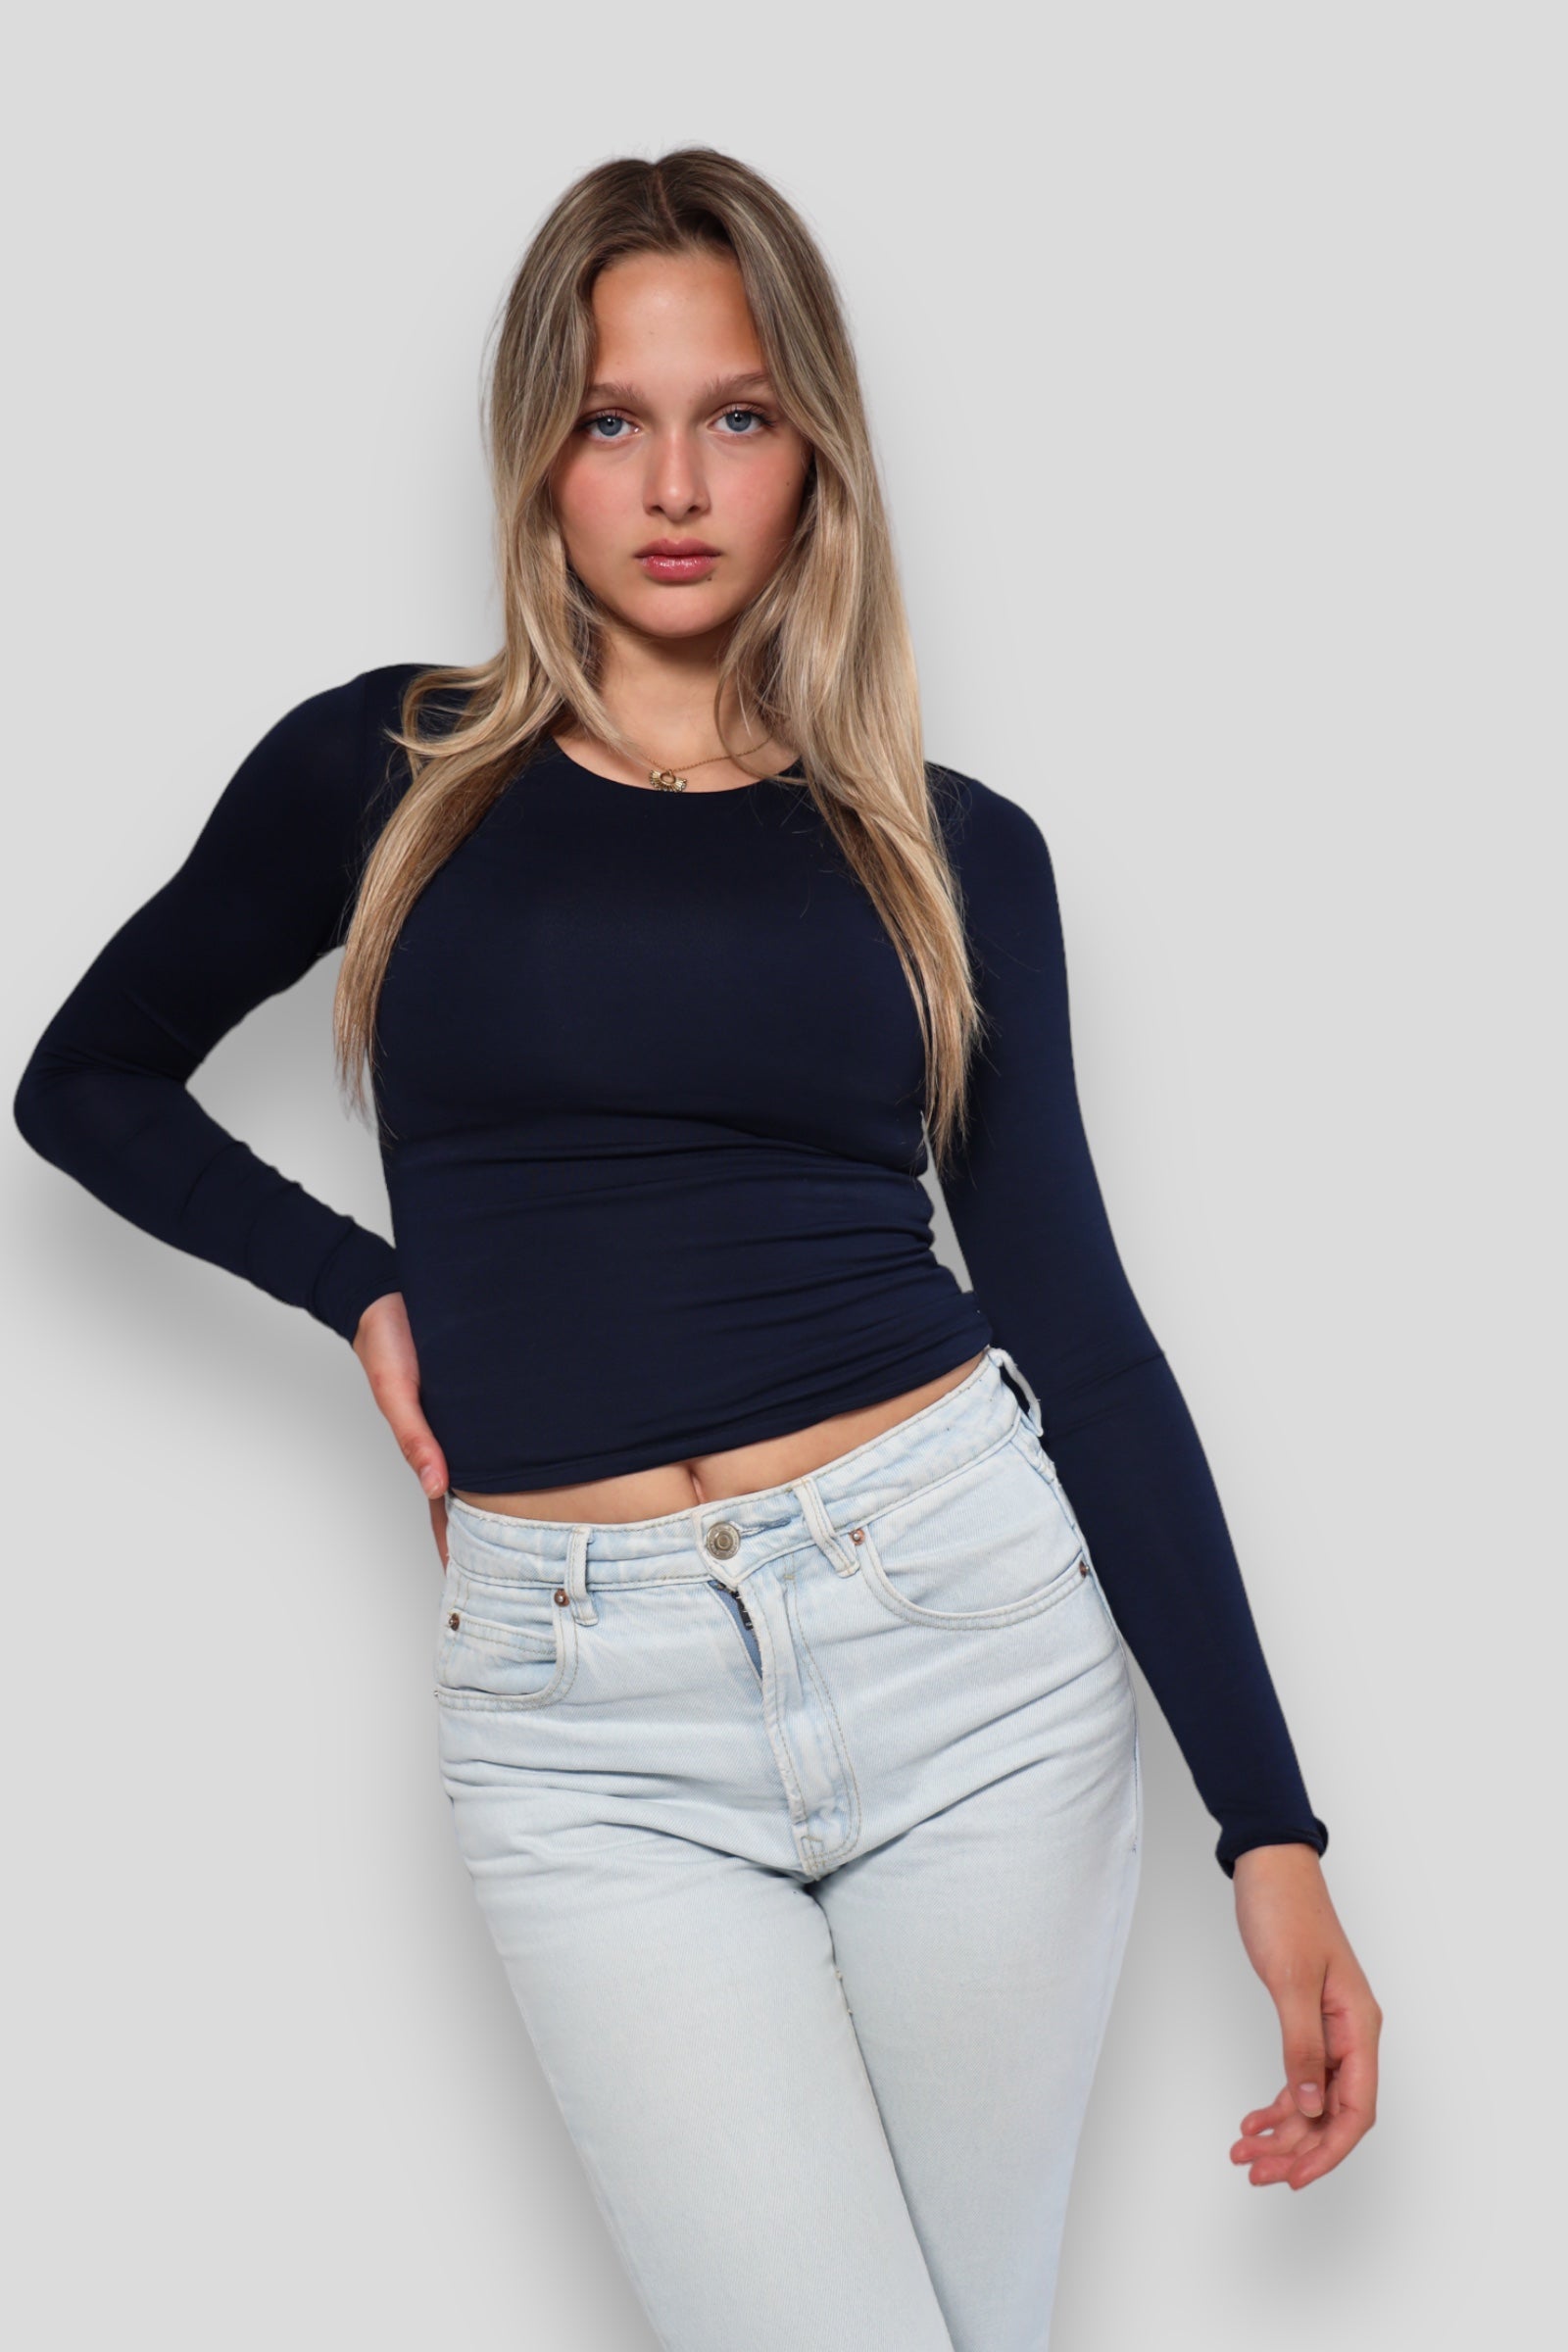 "Muse" top navy